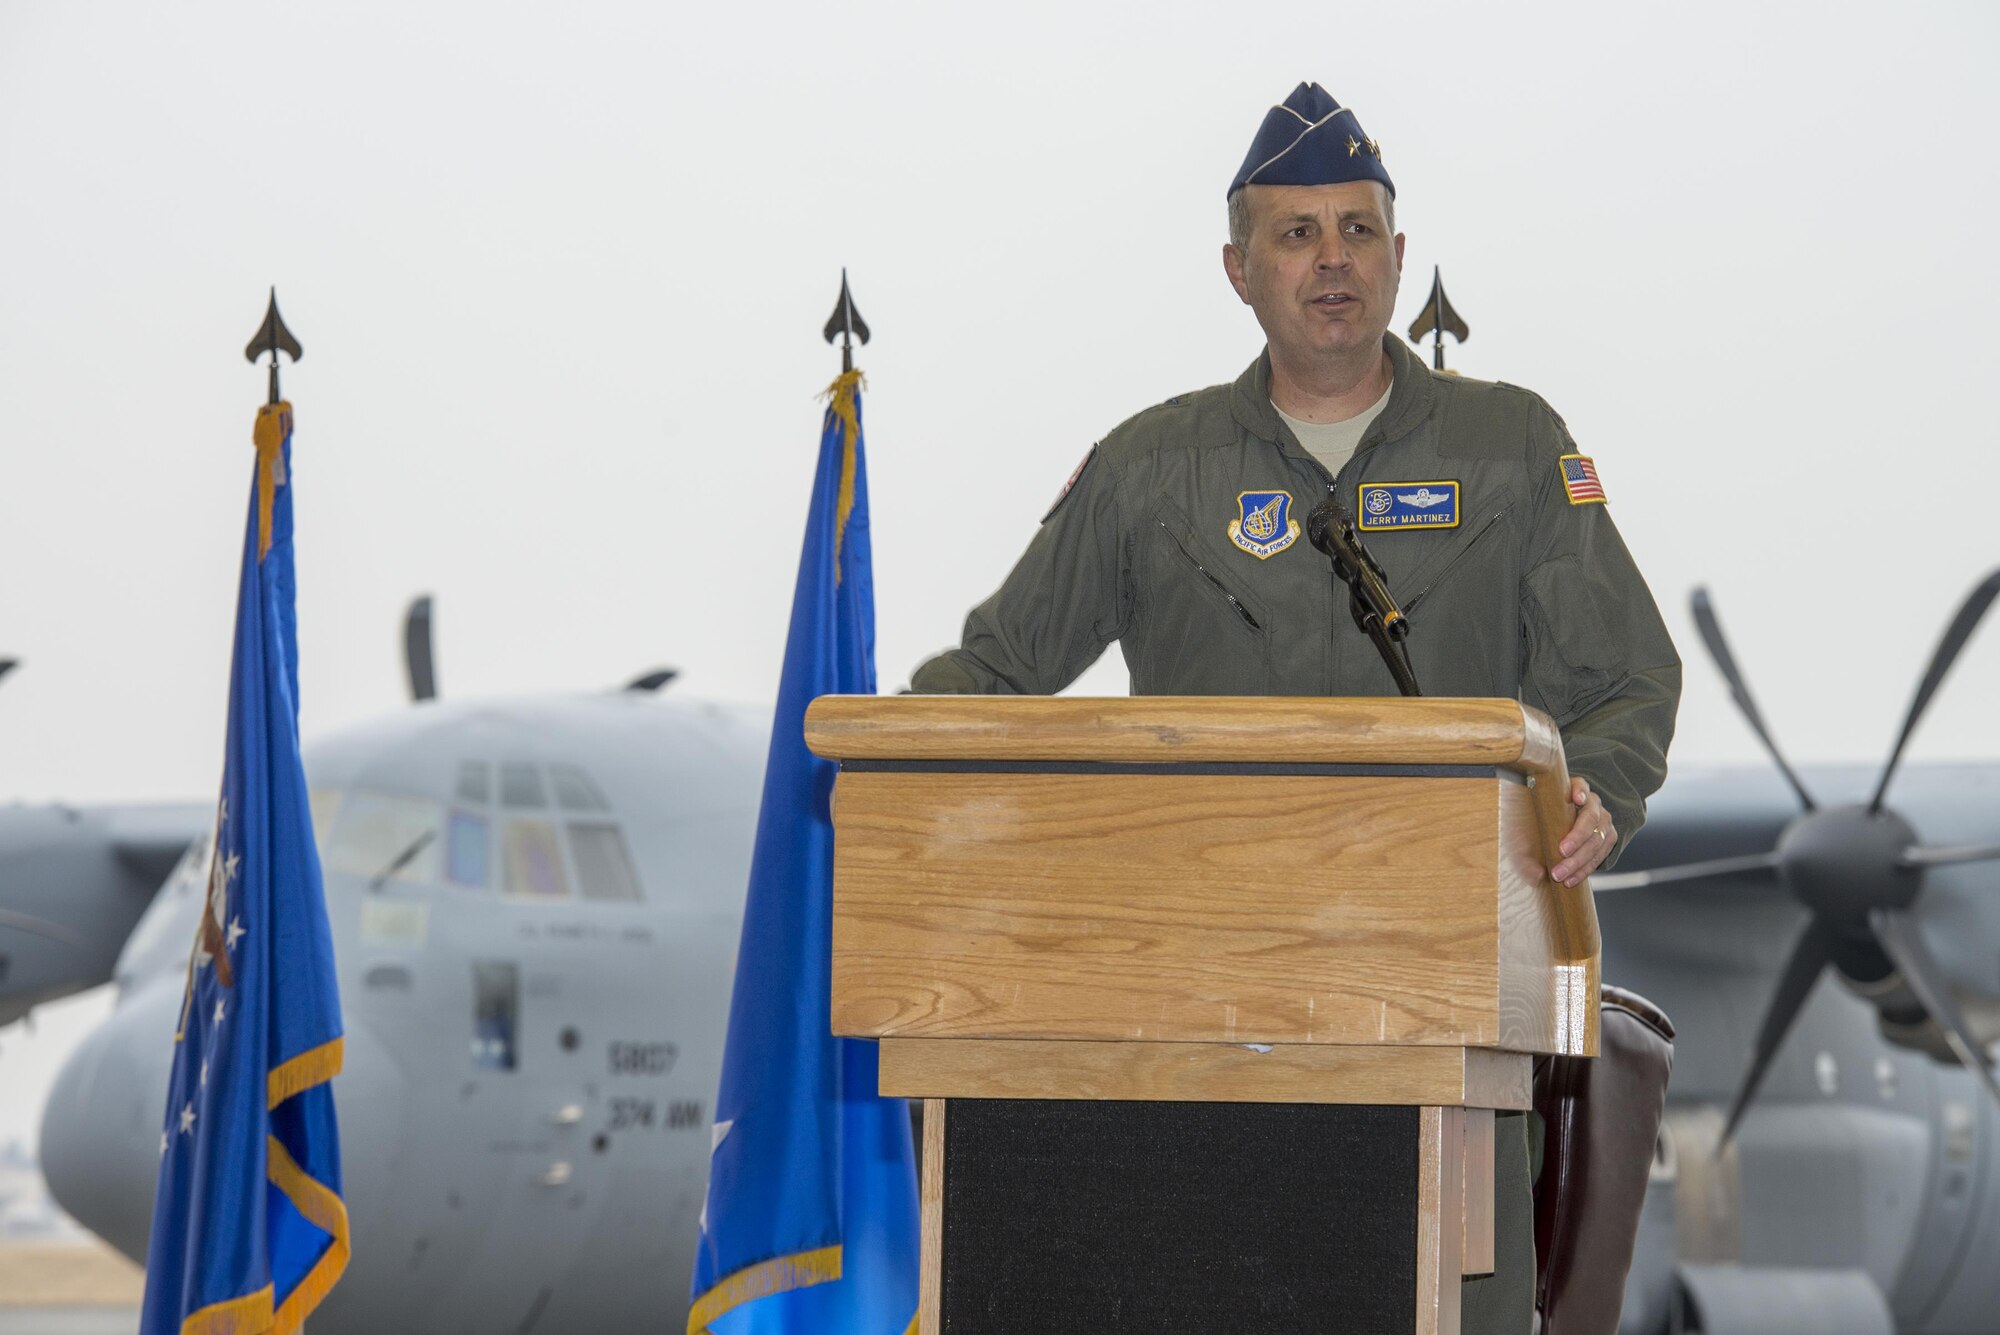 Lt. Gen. Jerry Martinez, U.S. Forces Japan and 5th Air Force commander, gives opening remarks during a ceremony held to celebrate the arrival of the first C-130J Super Hercules assigned to Yokota Air Base, Japan, Mar. 6, 2017. The C-130Js will be used to support critical peacekeeping and contingency operations throughout the Indo-Asia Pacific region, including cargo delivery, troop transport, airdrop and aeromedical missions. (U.S. Air Force photo by Senior Airman David C. Danford)